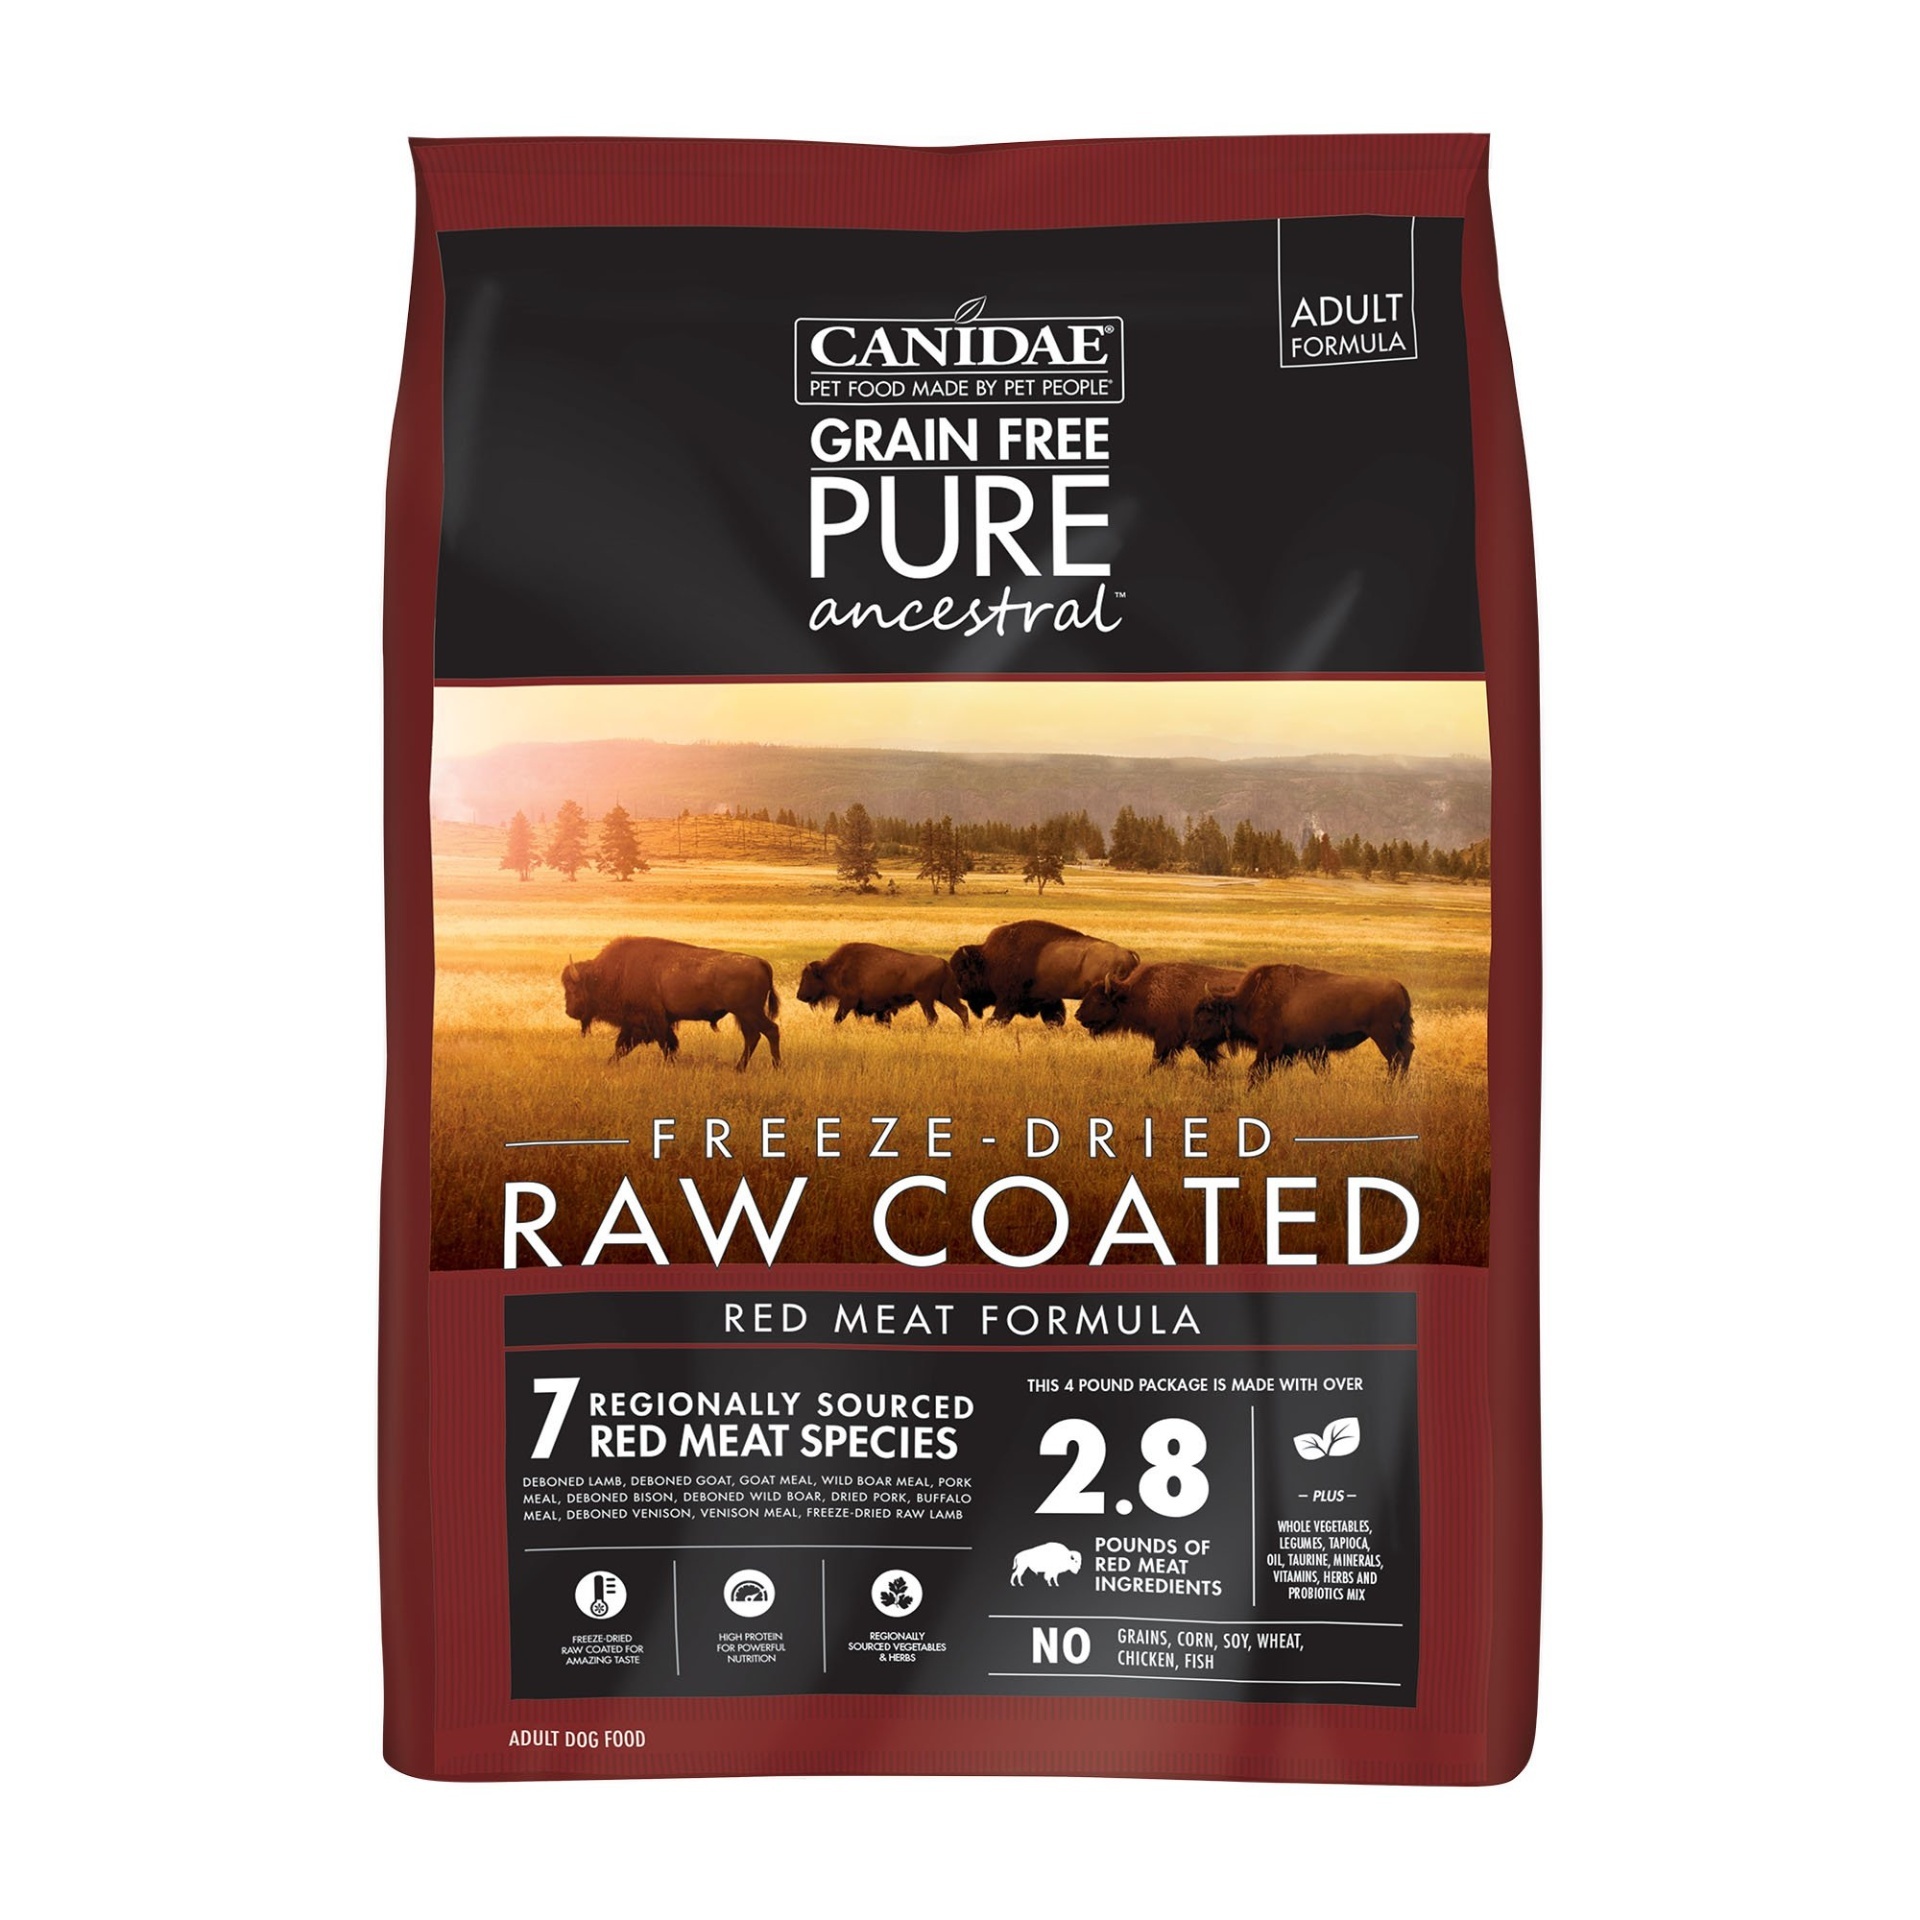 slide 1 of 1, CANIDAE Pure Ancestral Raw Coated Red Meat Formula Dry Dog Food, 4 lb